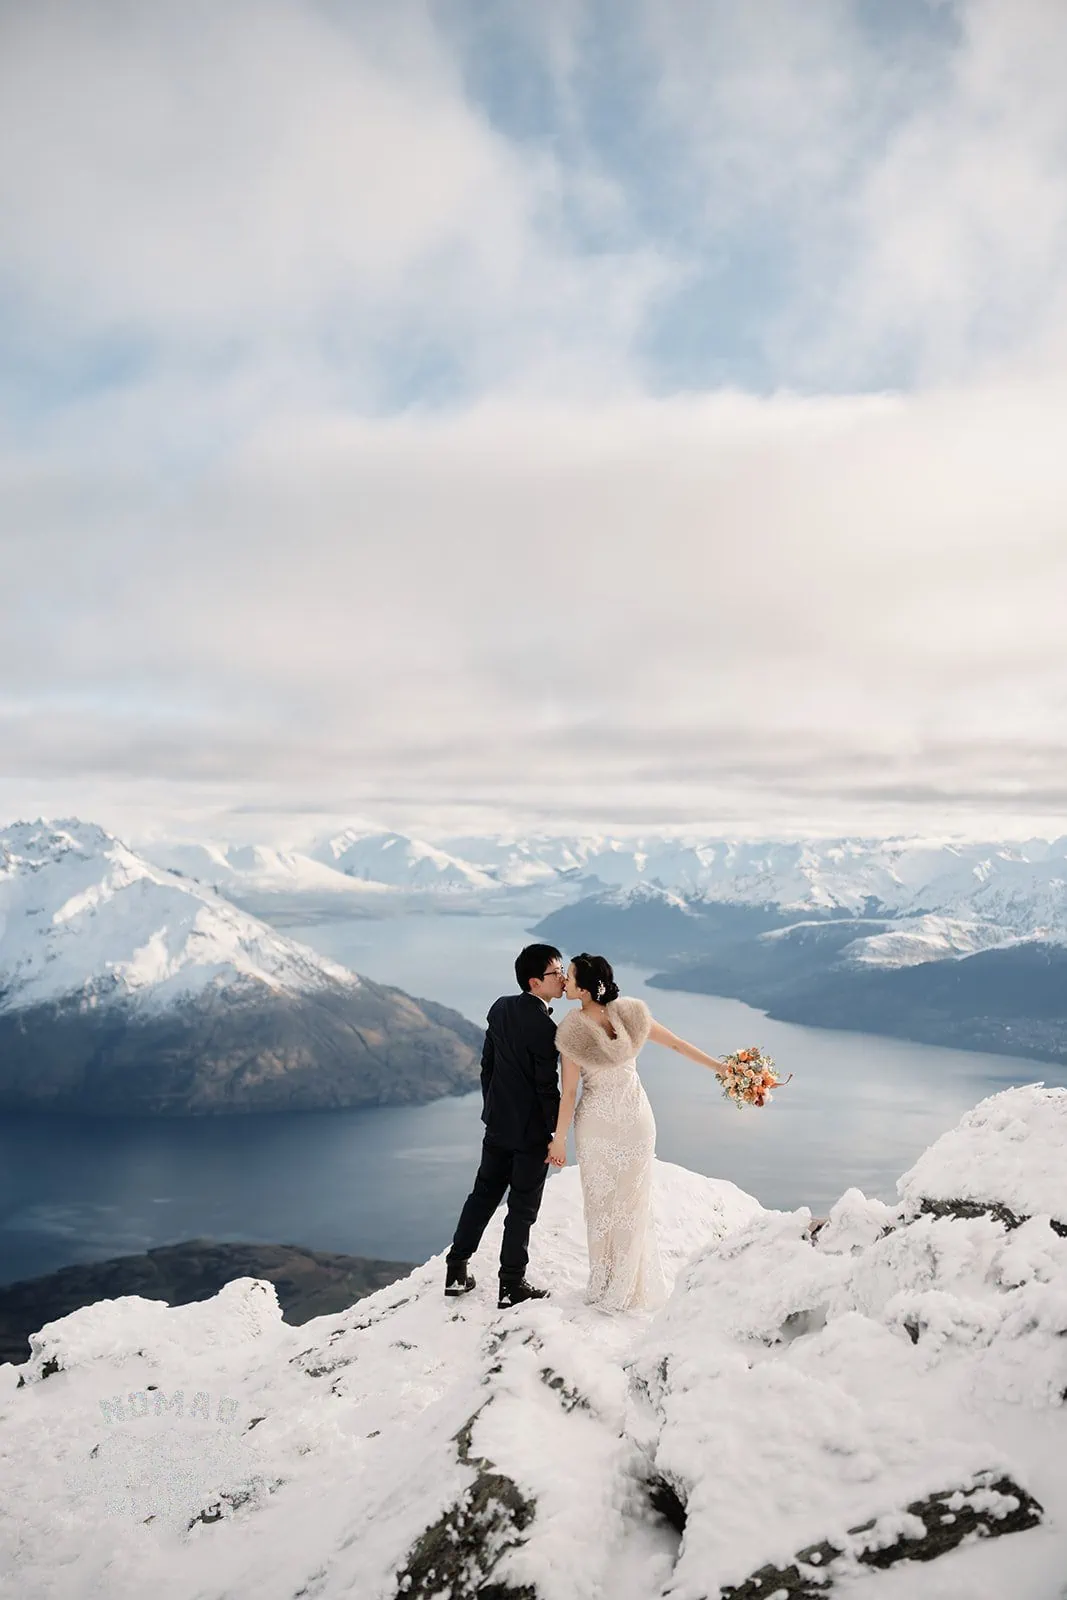 Joanna and Tony, a bride and groom, standing on top of a snow covered mountain in Queenstown, New Zealand during their pre-wedding shoot.